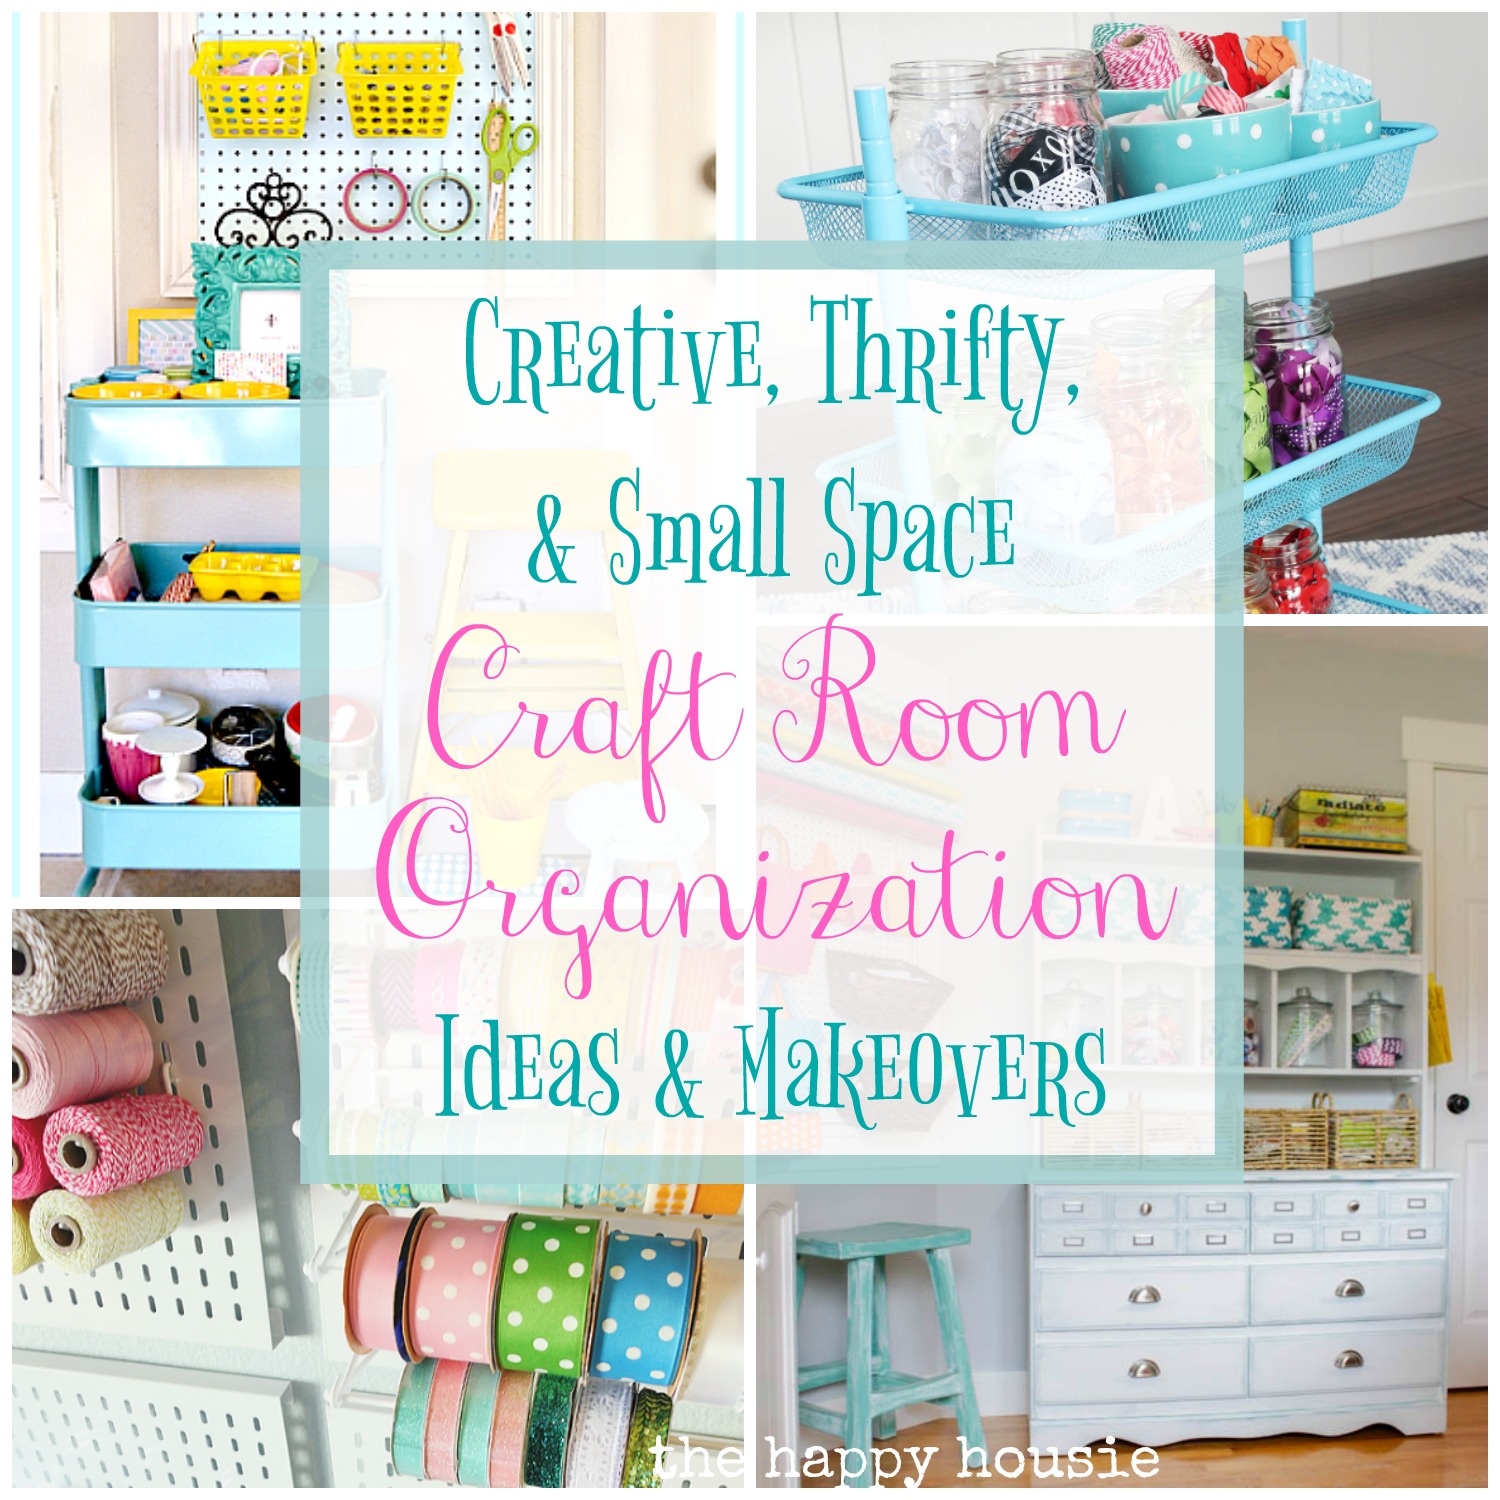 Creative Craft Storage Ideas for Small Spaces - Petit & Small